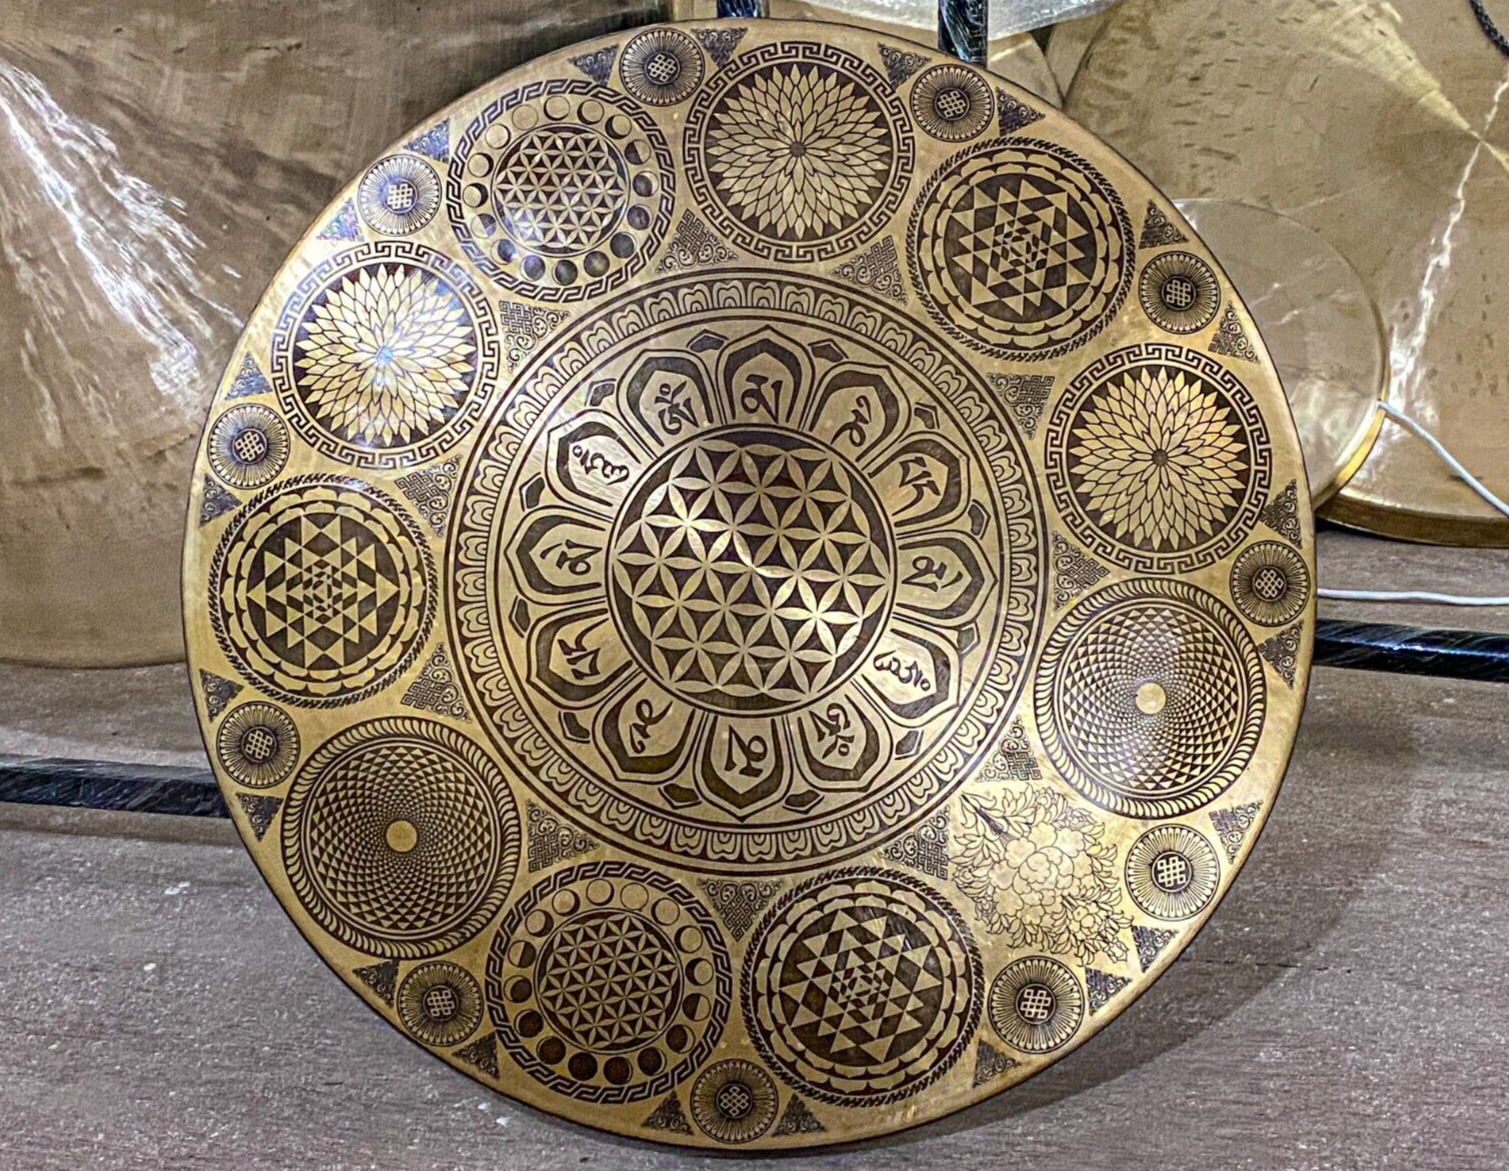 Sale 50cm Special Flower of life carving Sound Healing Tibetan gong from Nepal.